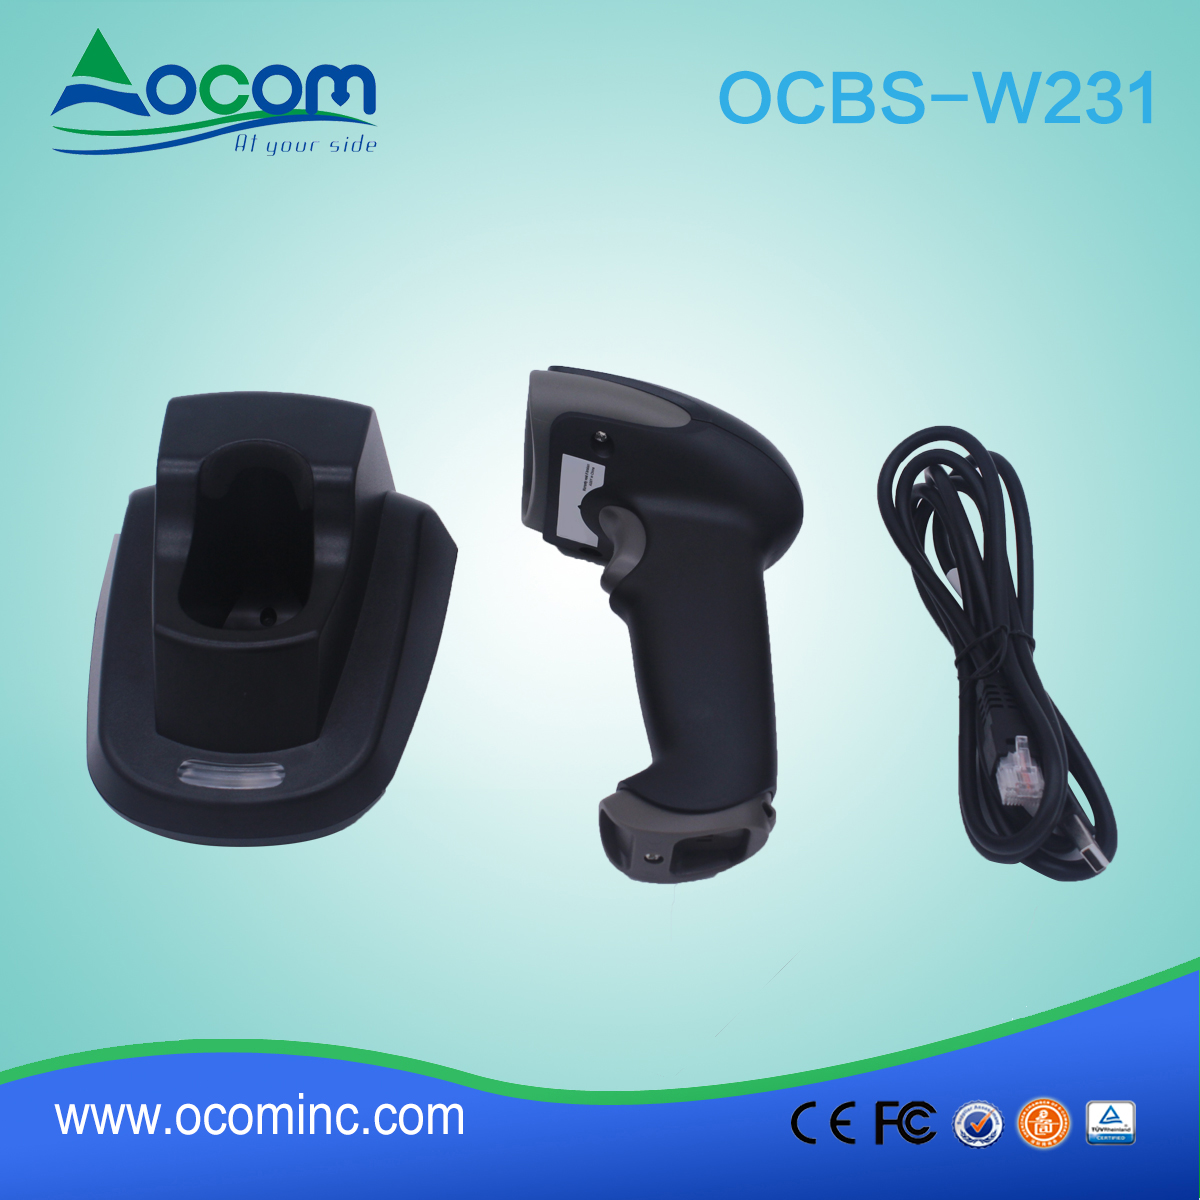 (OCBS-W231) Rugged 433Mhz 2d barcode scanner with craddle